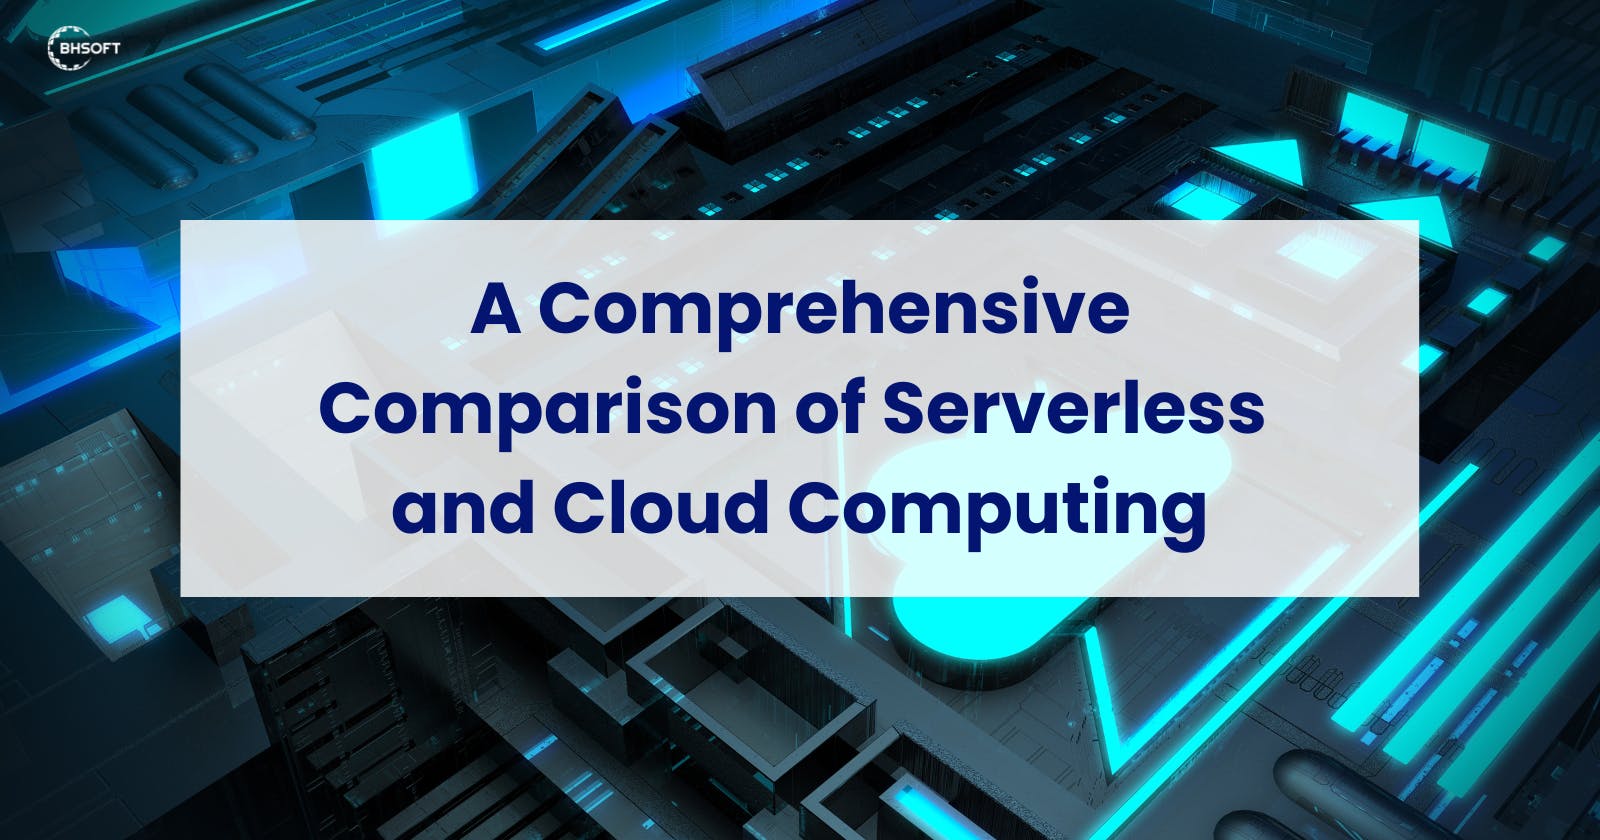 A Comprehensive Comparison of Serverless and Cloud Computing